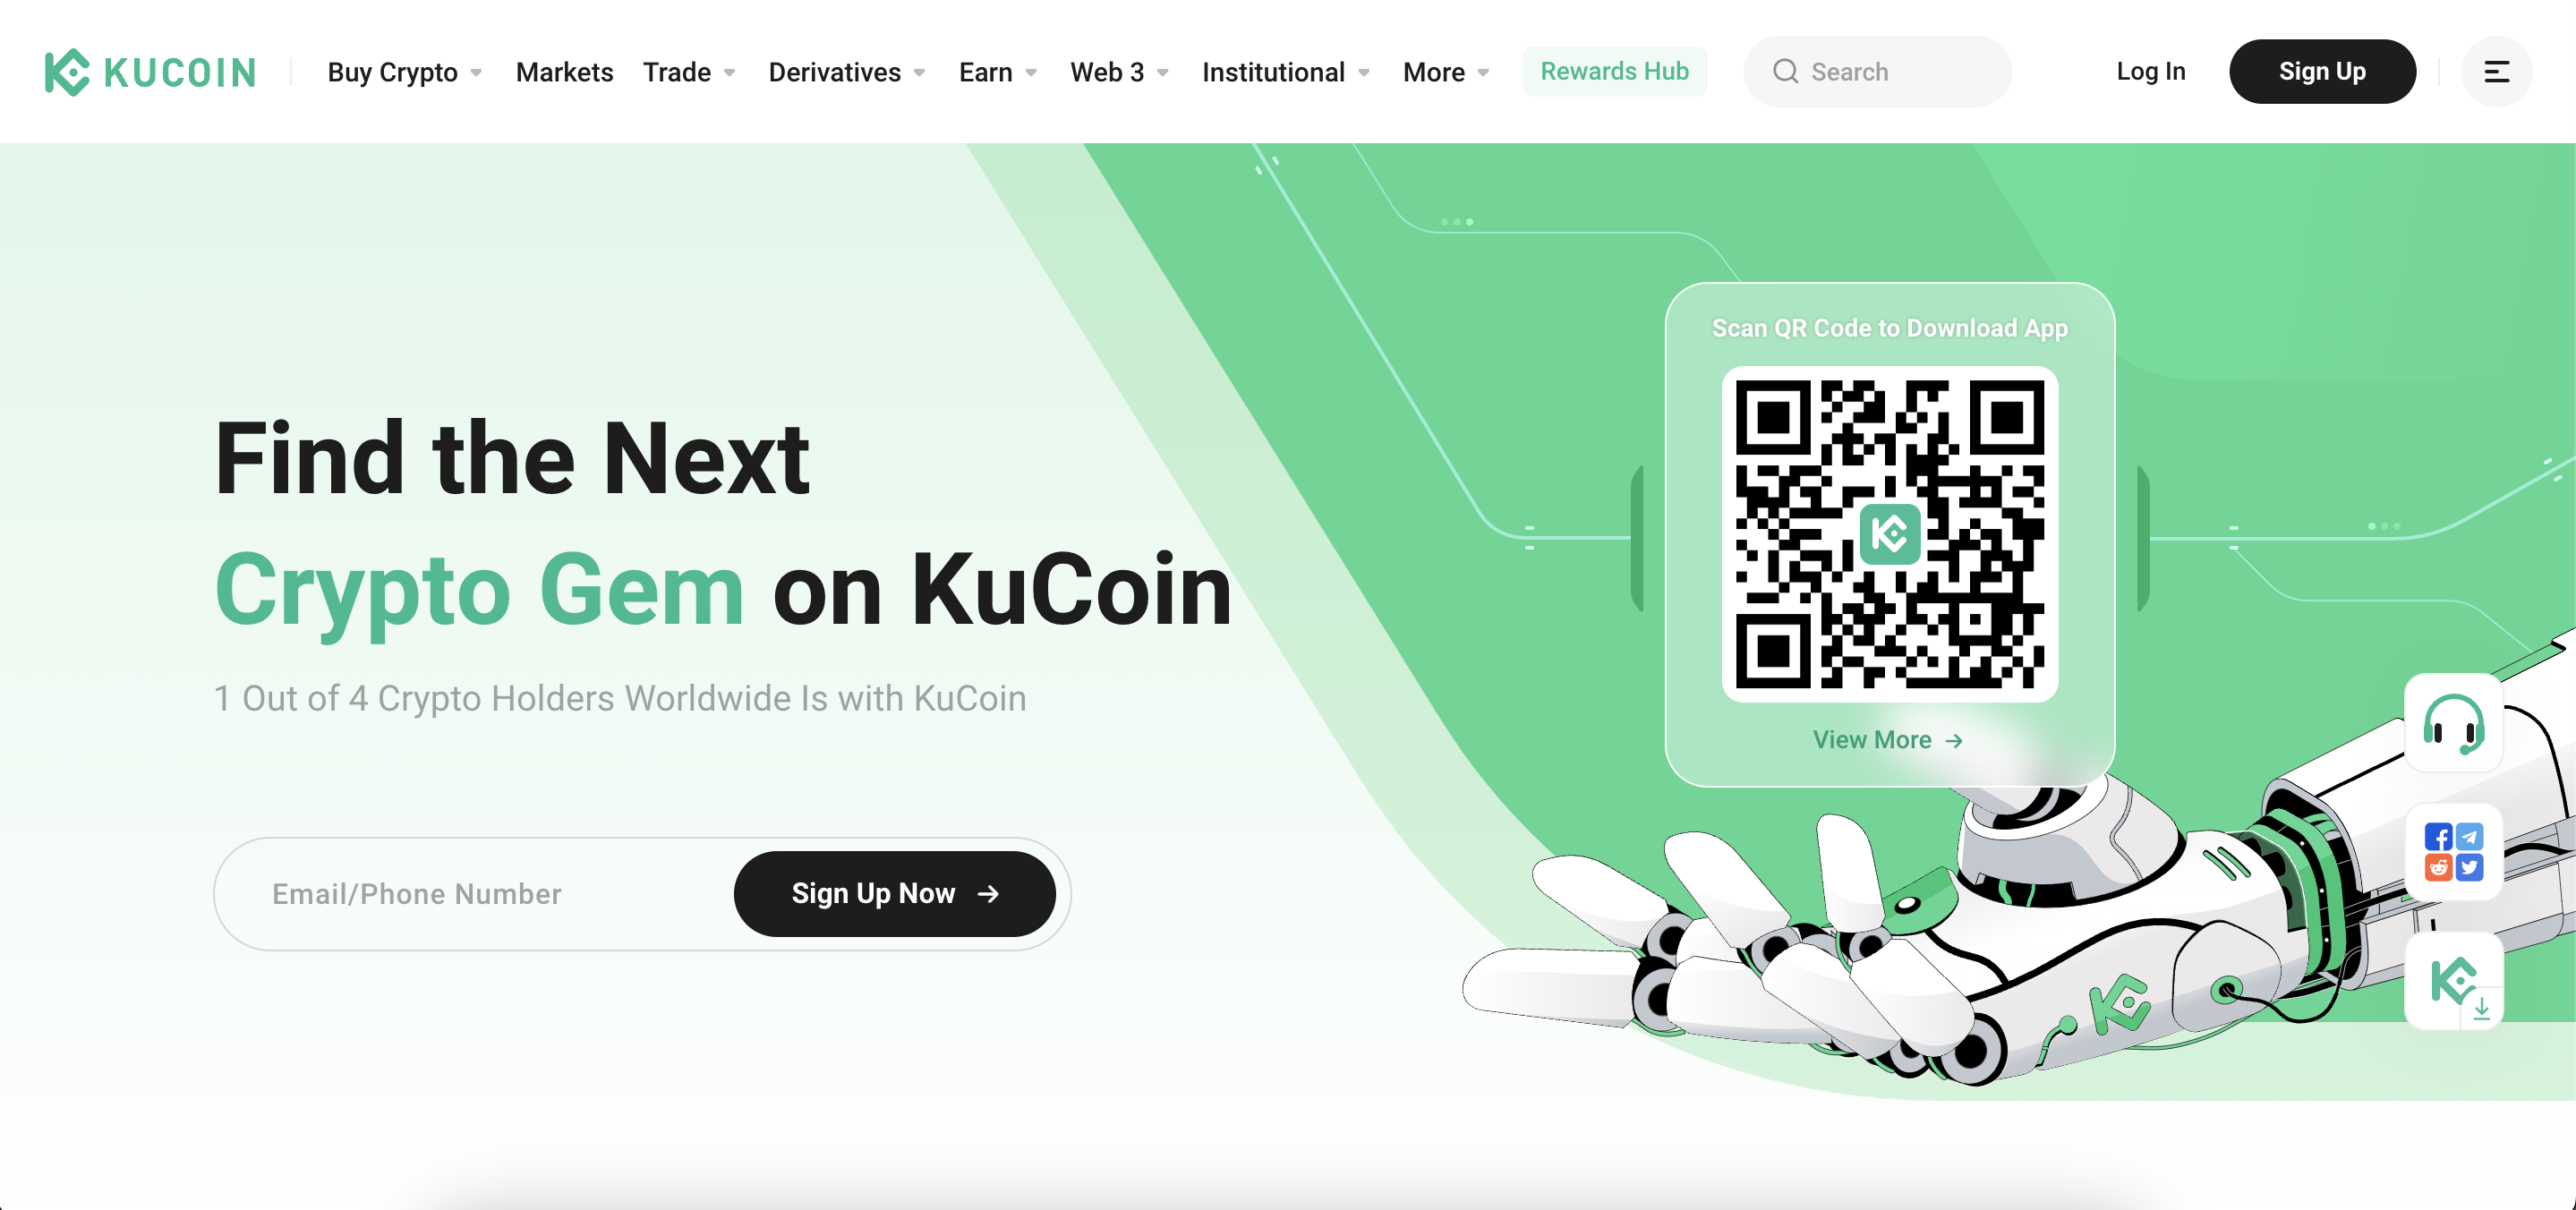 Green and White combo UI of KuCoin Website